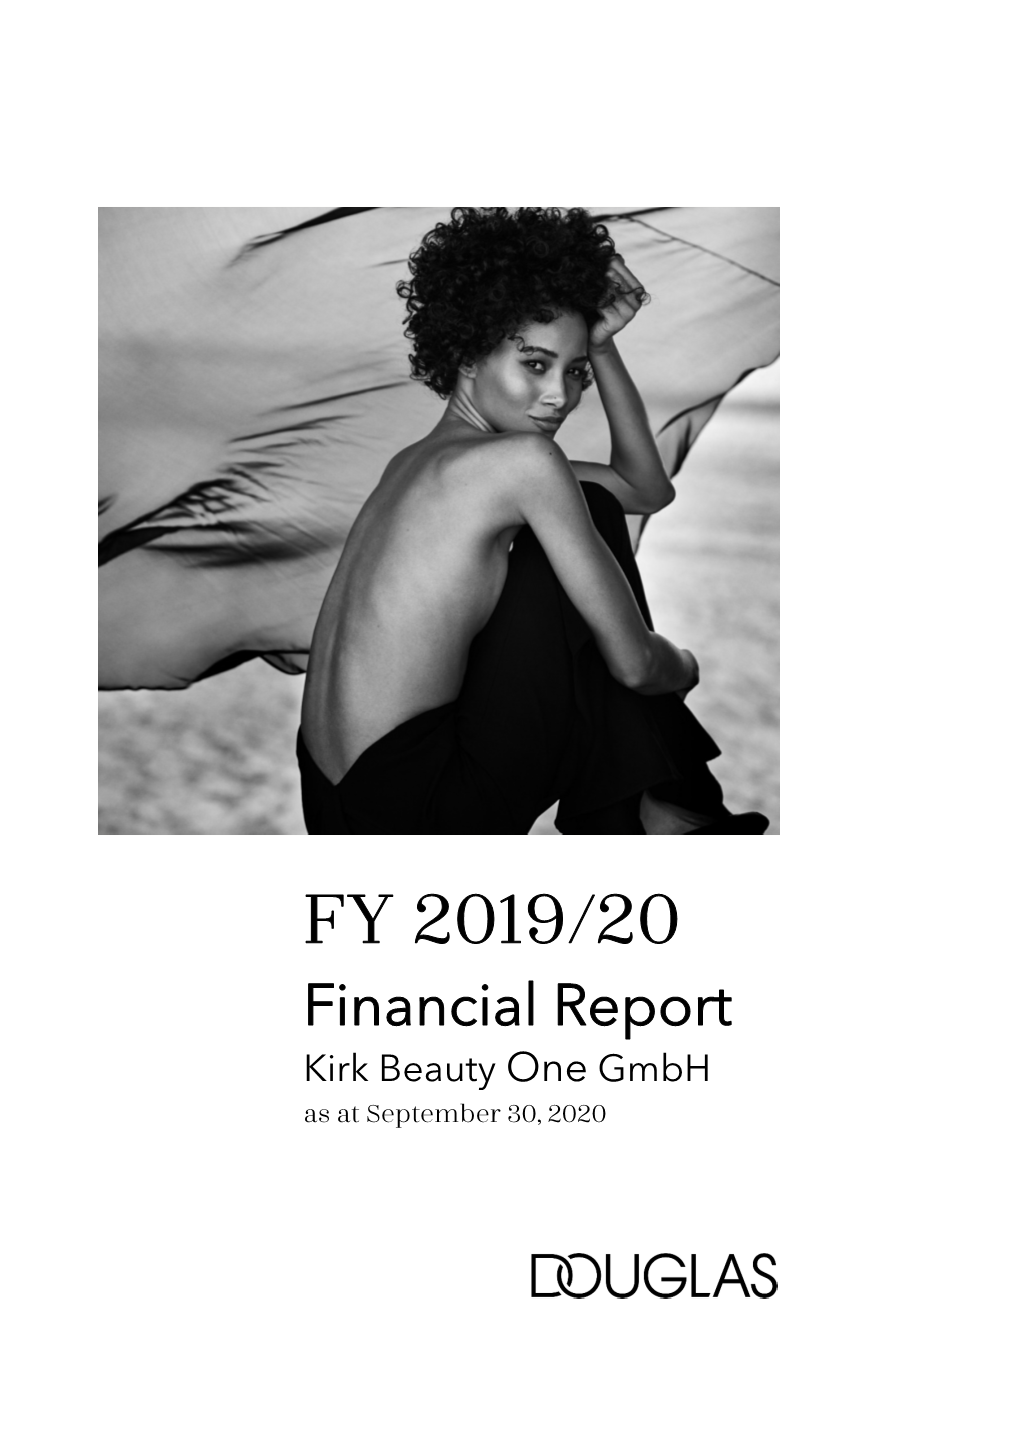 FY 2019/20 Financial Report Kirk Beauty One Gmbh As at September 30, 2020 Content